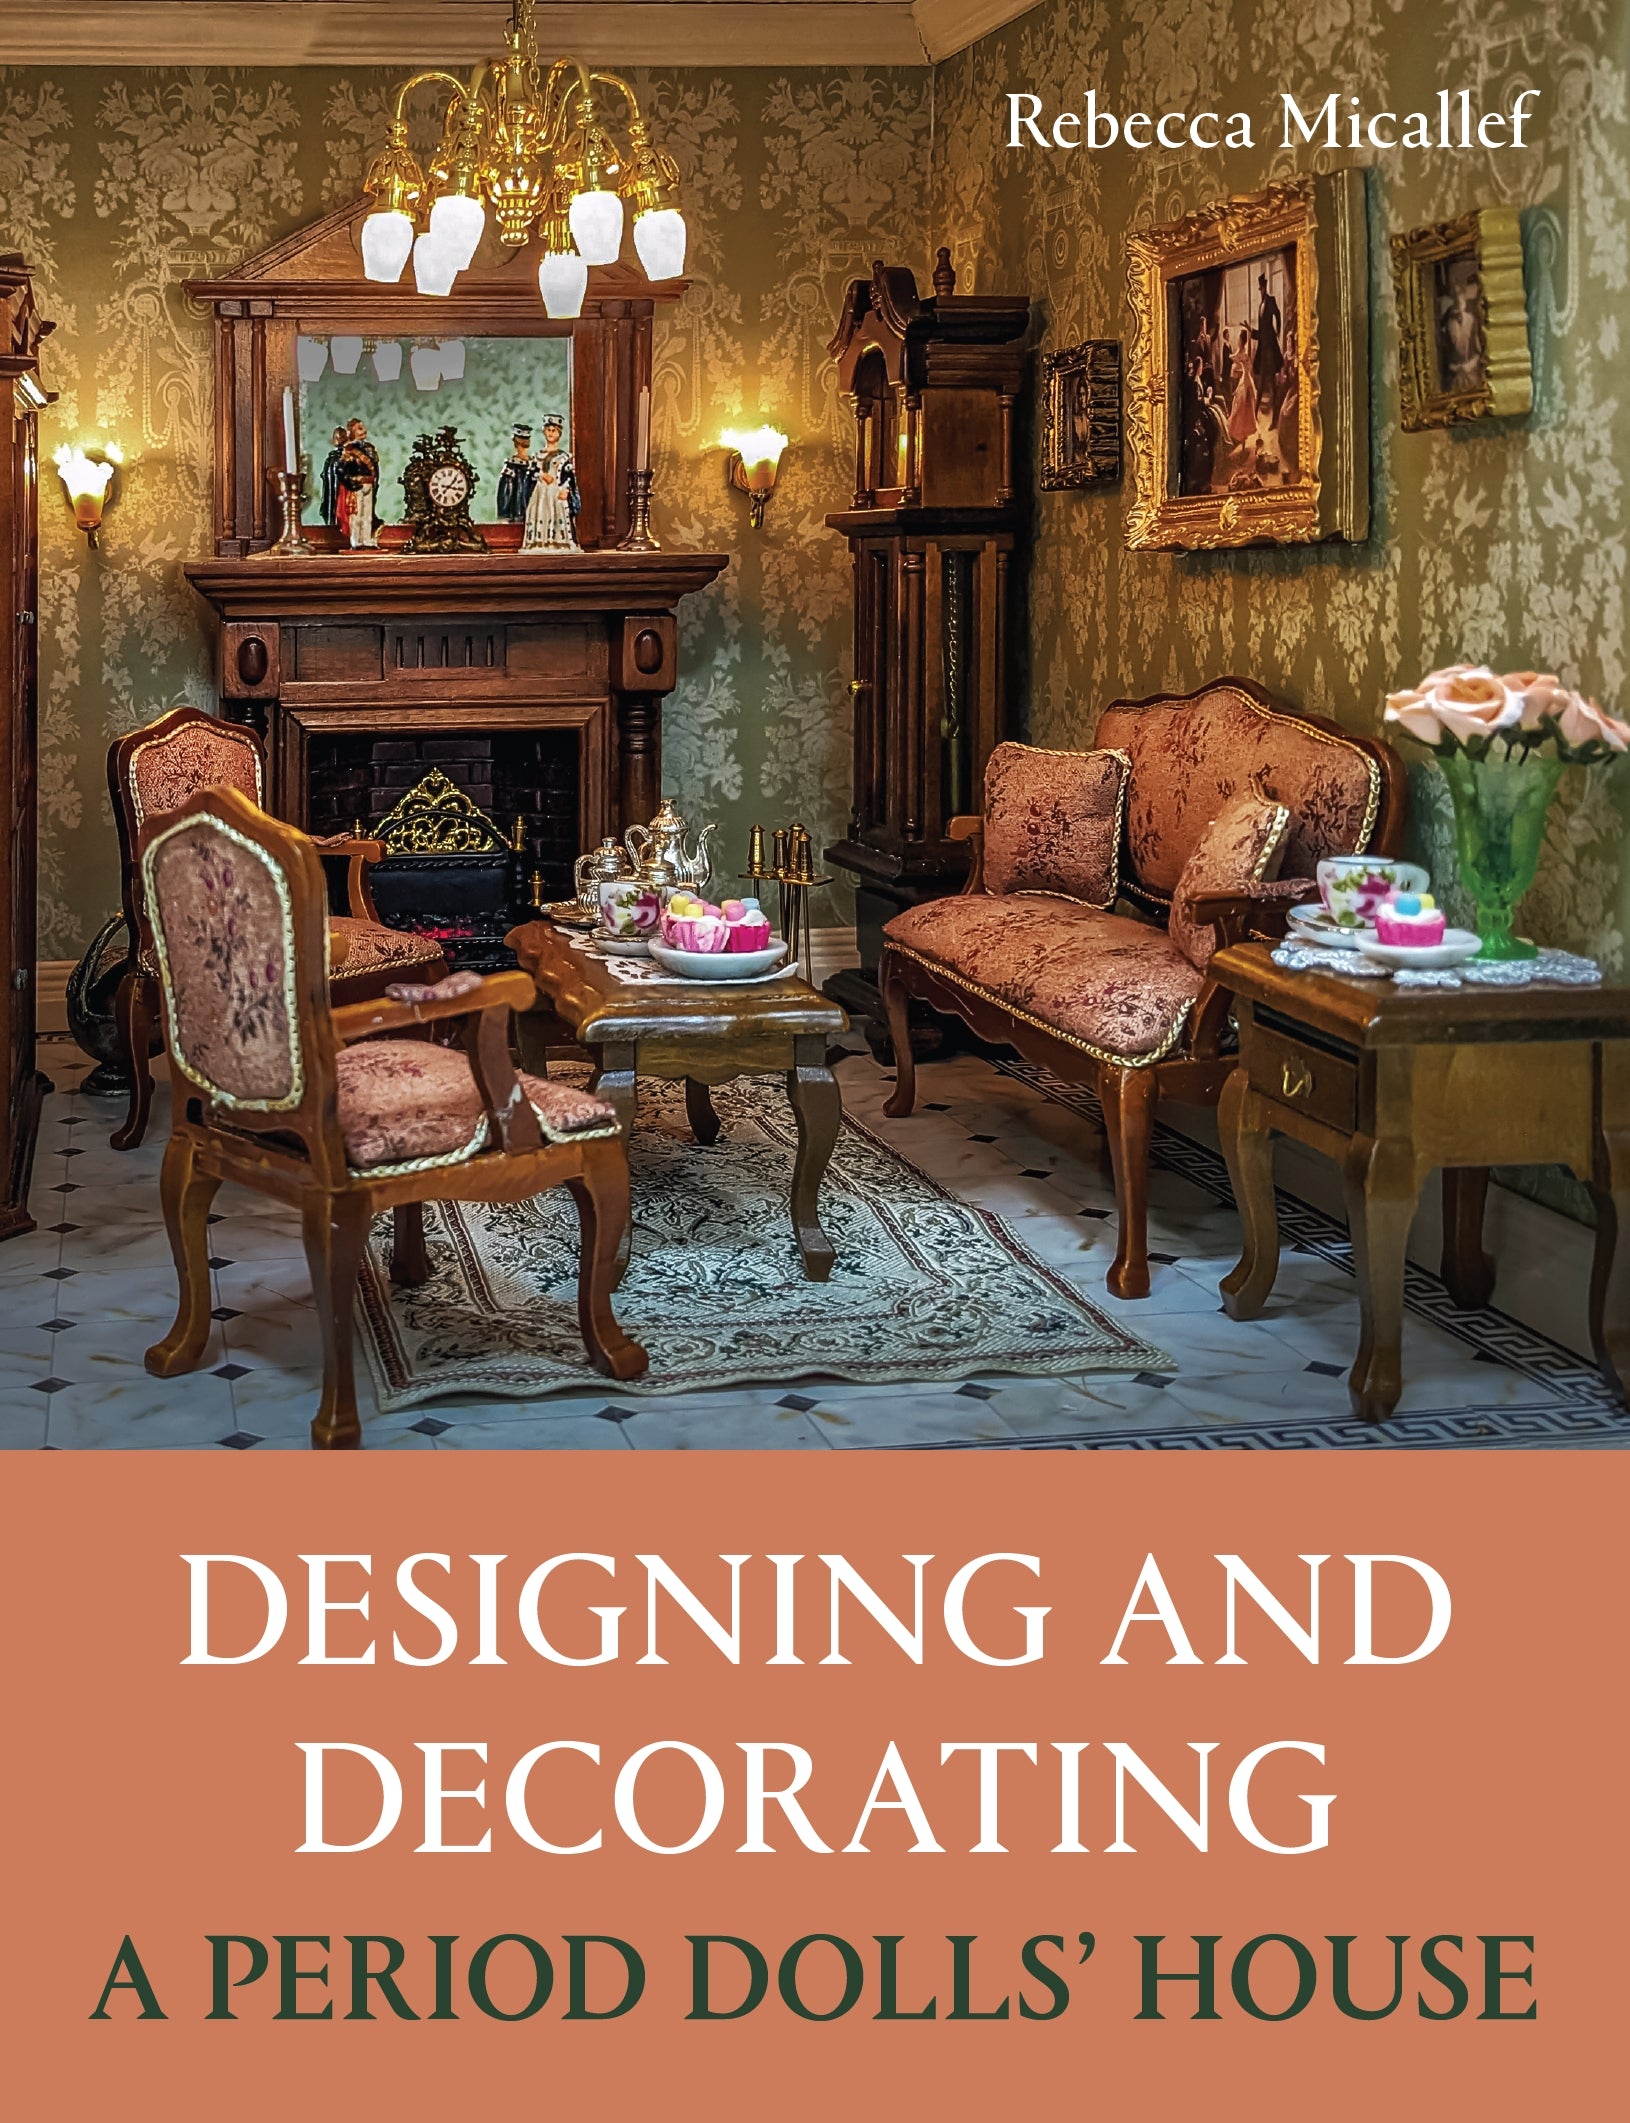 Designing and Decorating a Period Dolls’ House